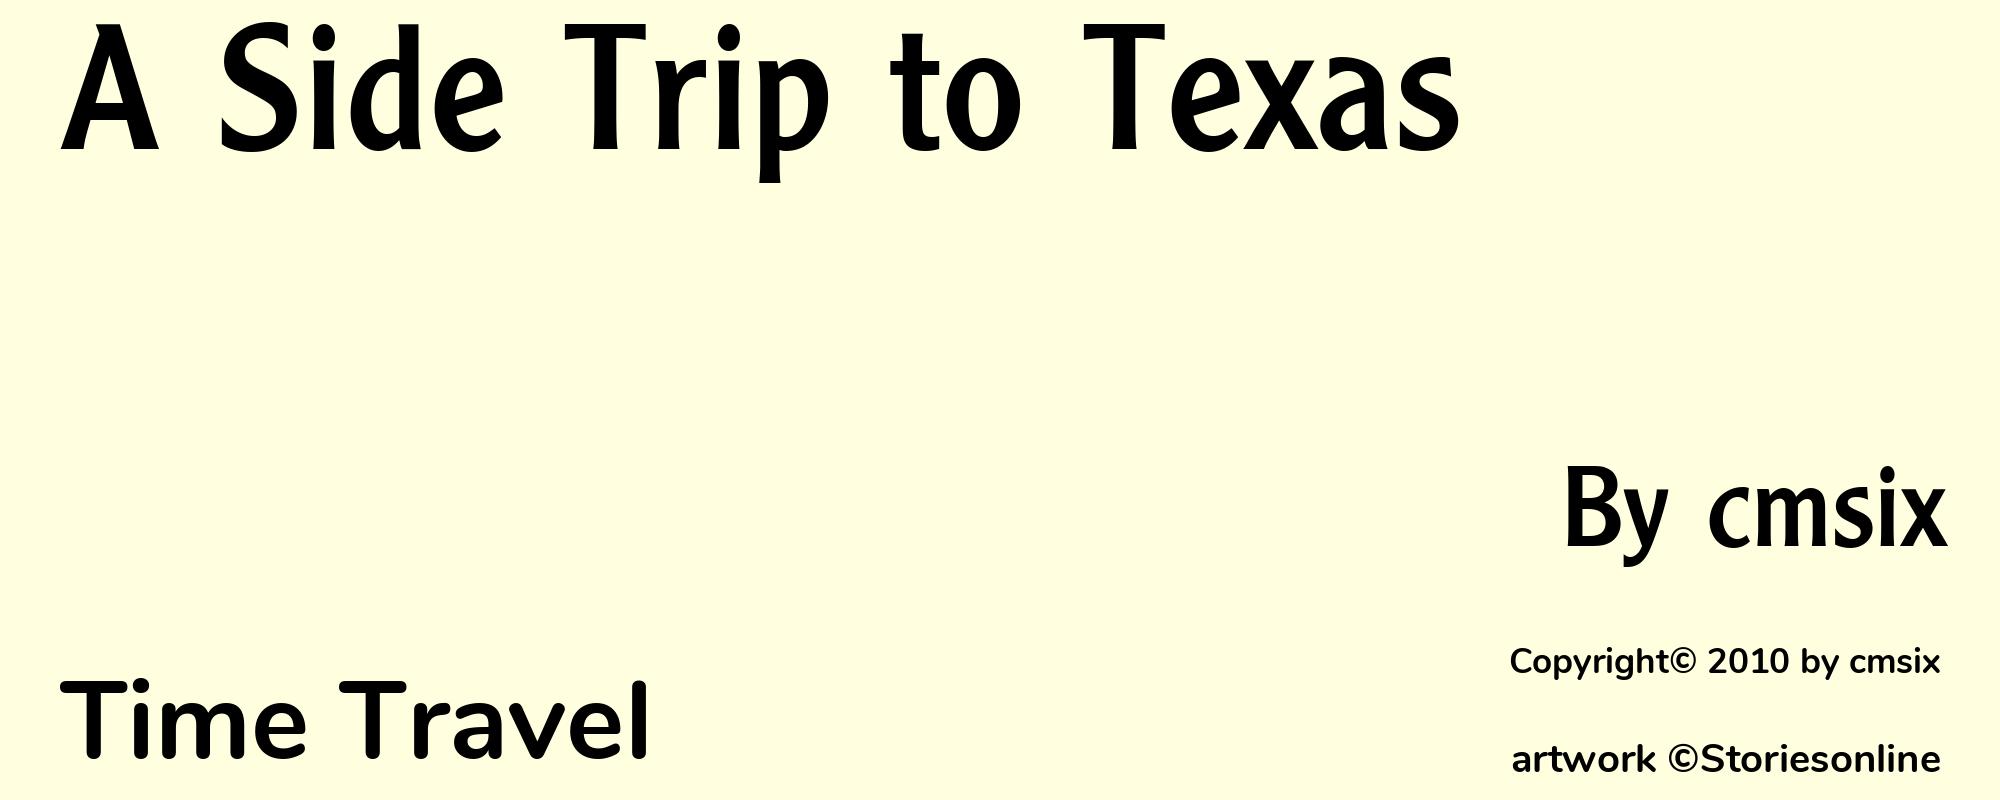 A Side Trip to Texas - Cover